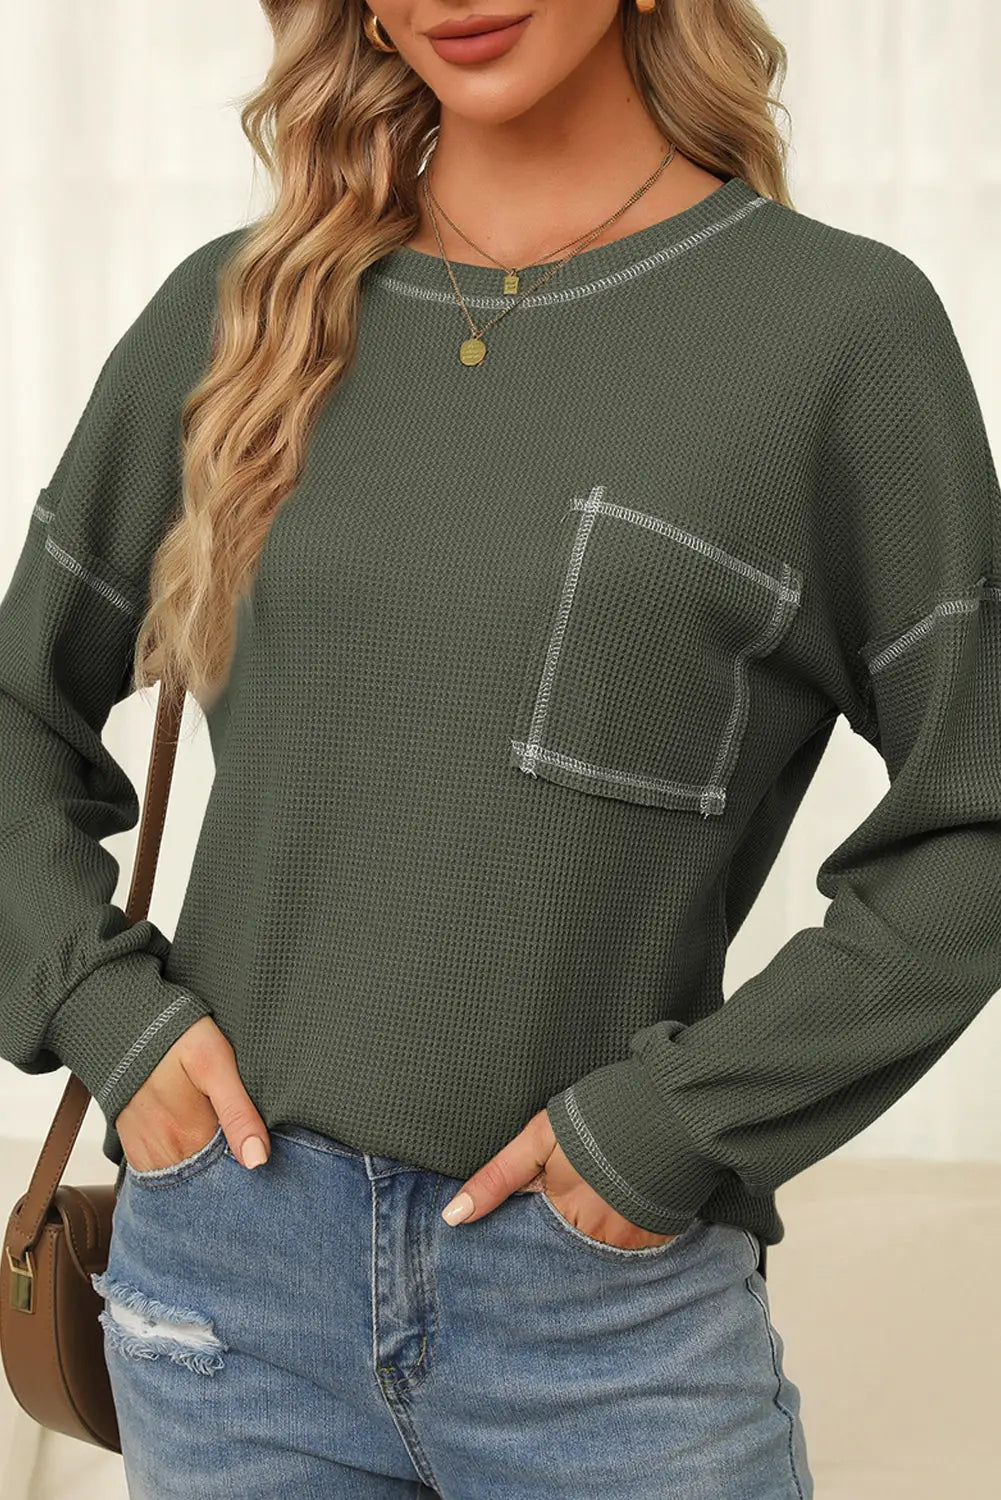 Mist green contrast exposed stitching waffle knit blouse - blouses & shirts